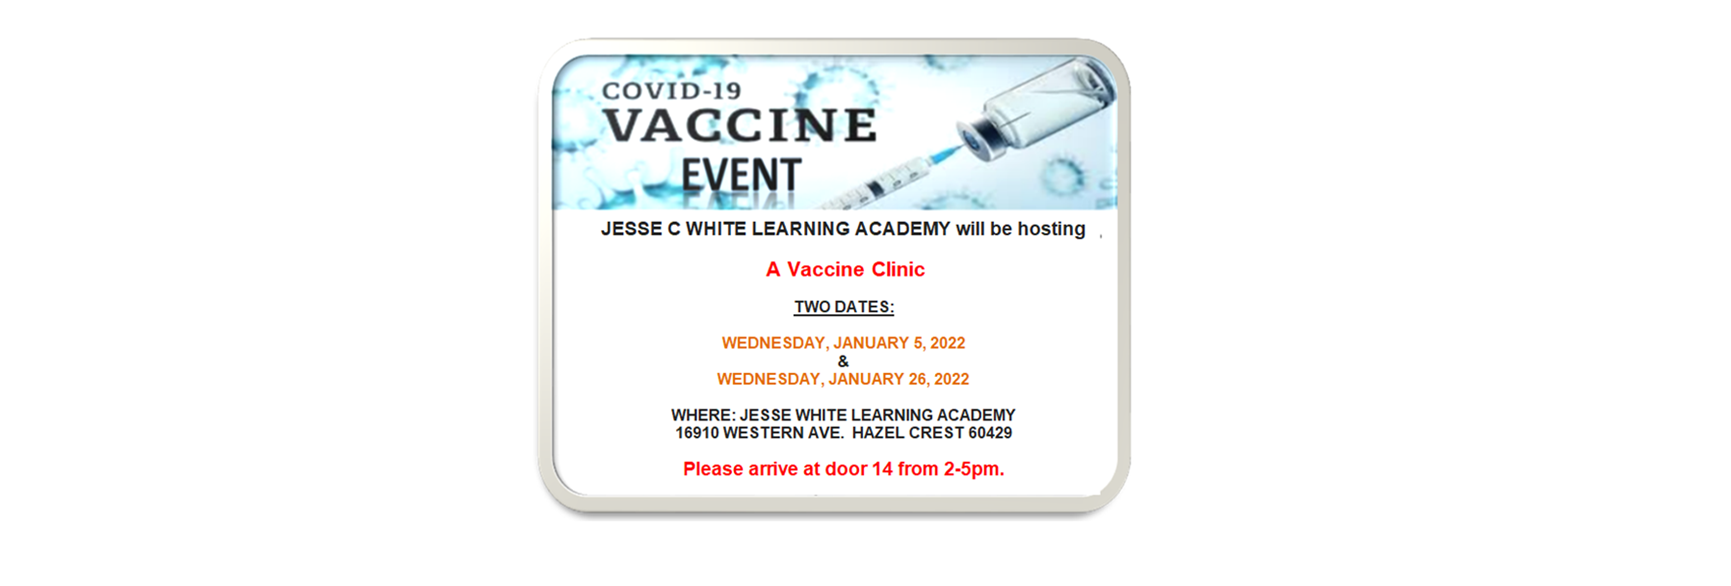 Vaccine Event - January 5th & January 26th